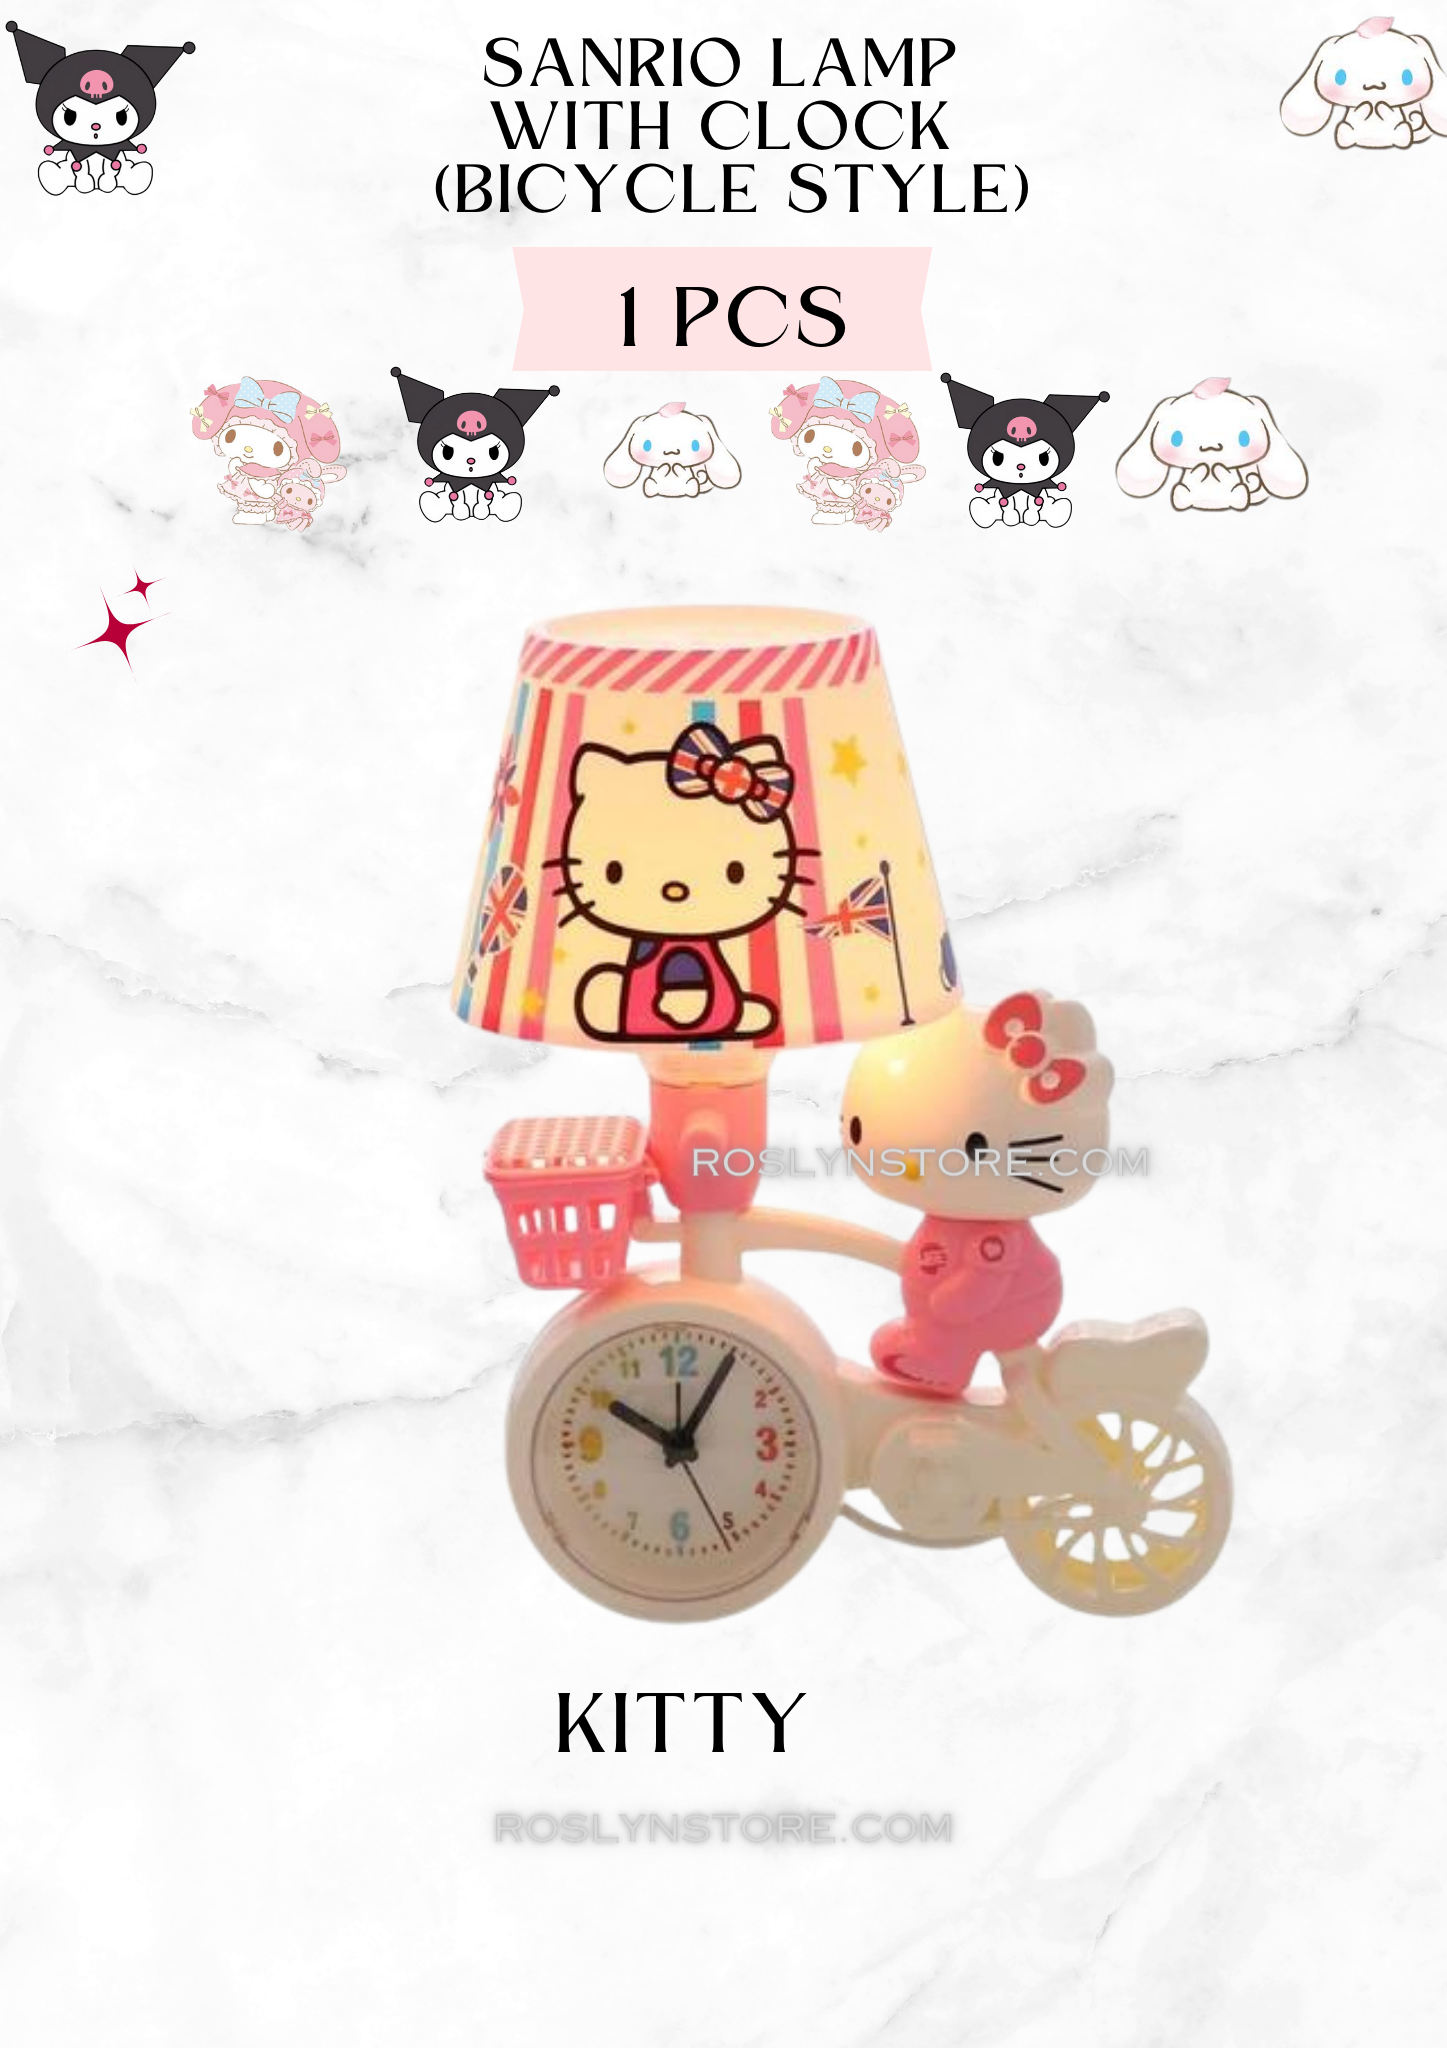 Sanrio Lamp with clock  (bicycle style)